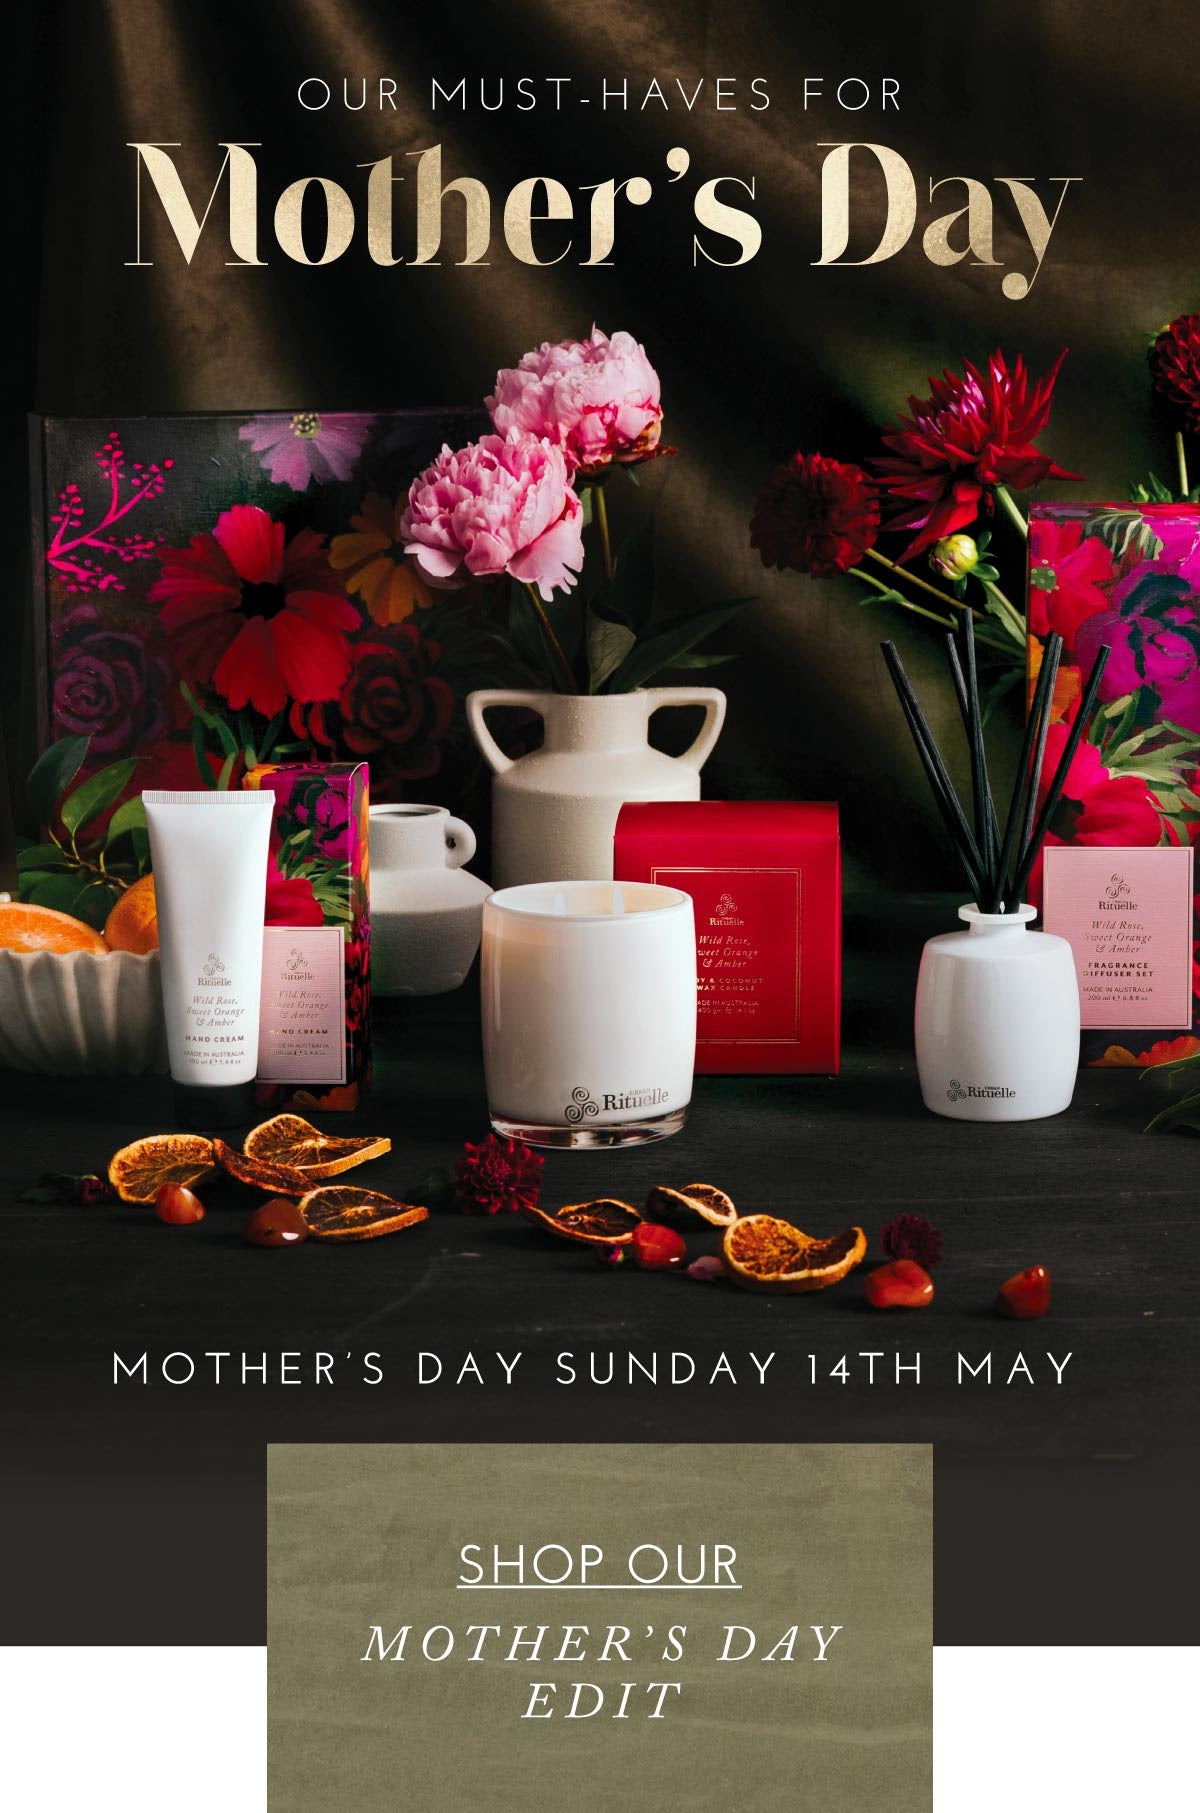 Looking for the perfect gift for Mum this Mother’s Day?